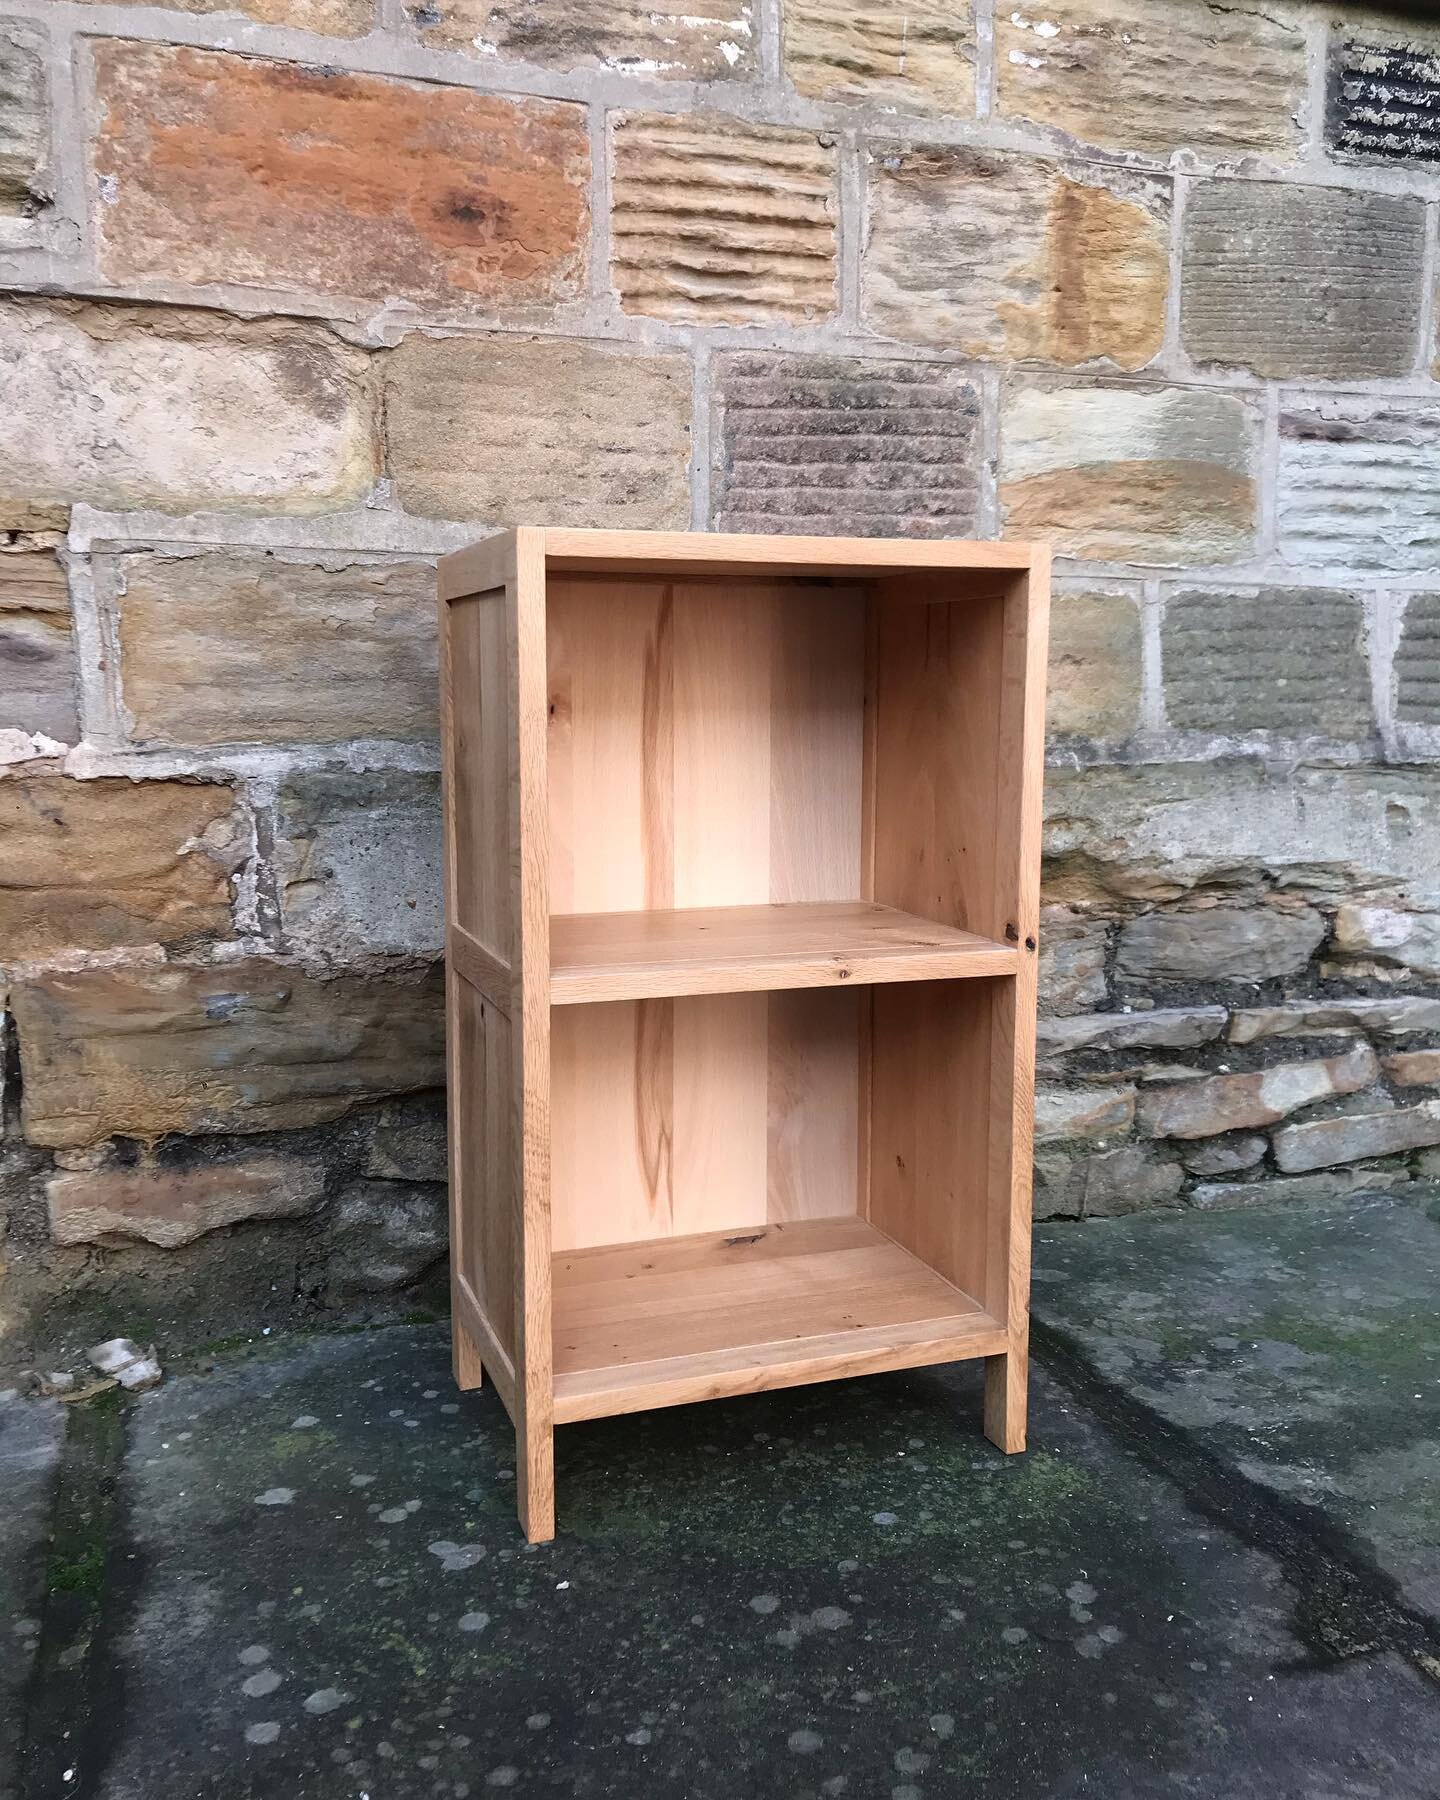 Here goes.....I&rsquo;m going to attempt to explain how this little piece of furniture came into life.

A few years ago I ventured into buying some wood from a local tree surgeon based down the road in Holmfirth. I came away with a modest stack of wh